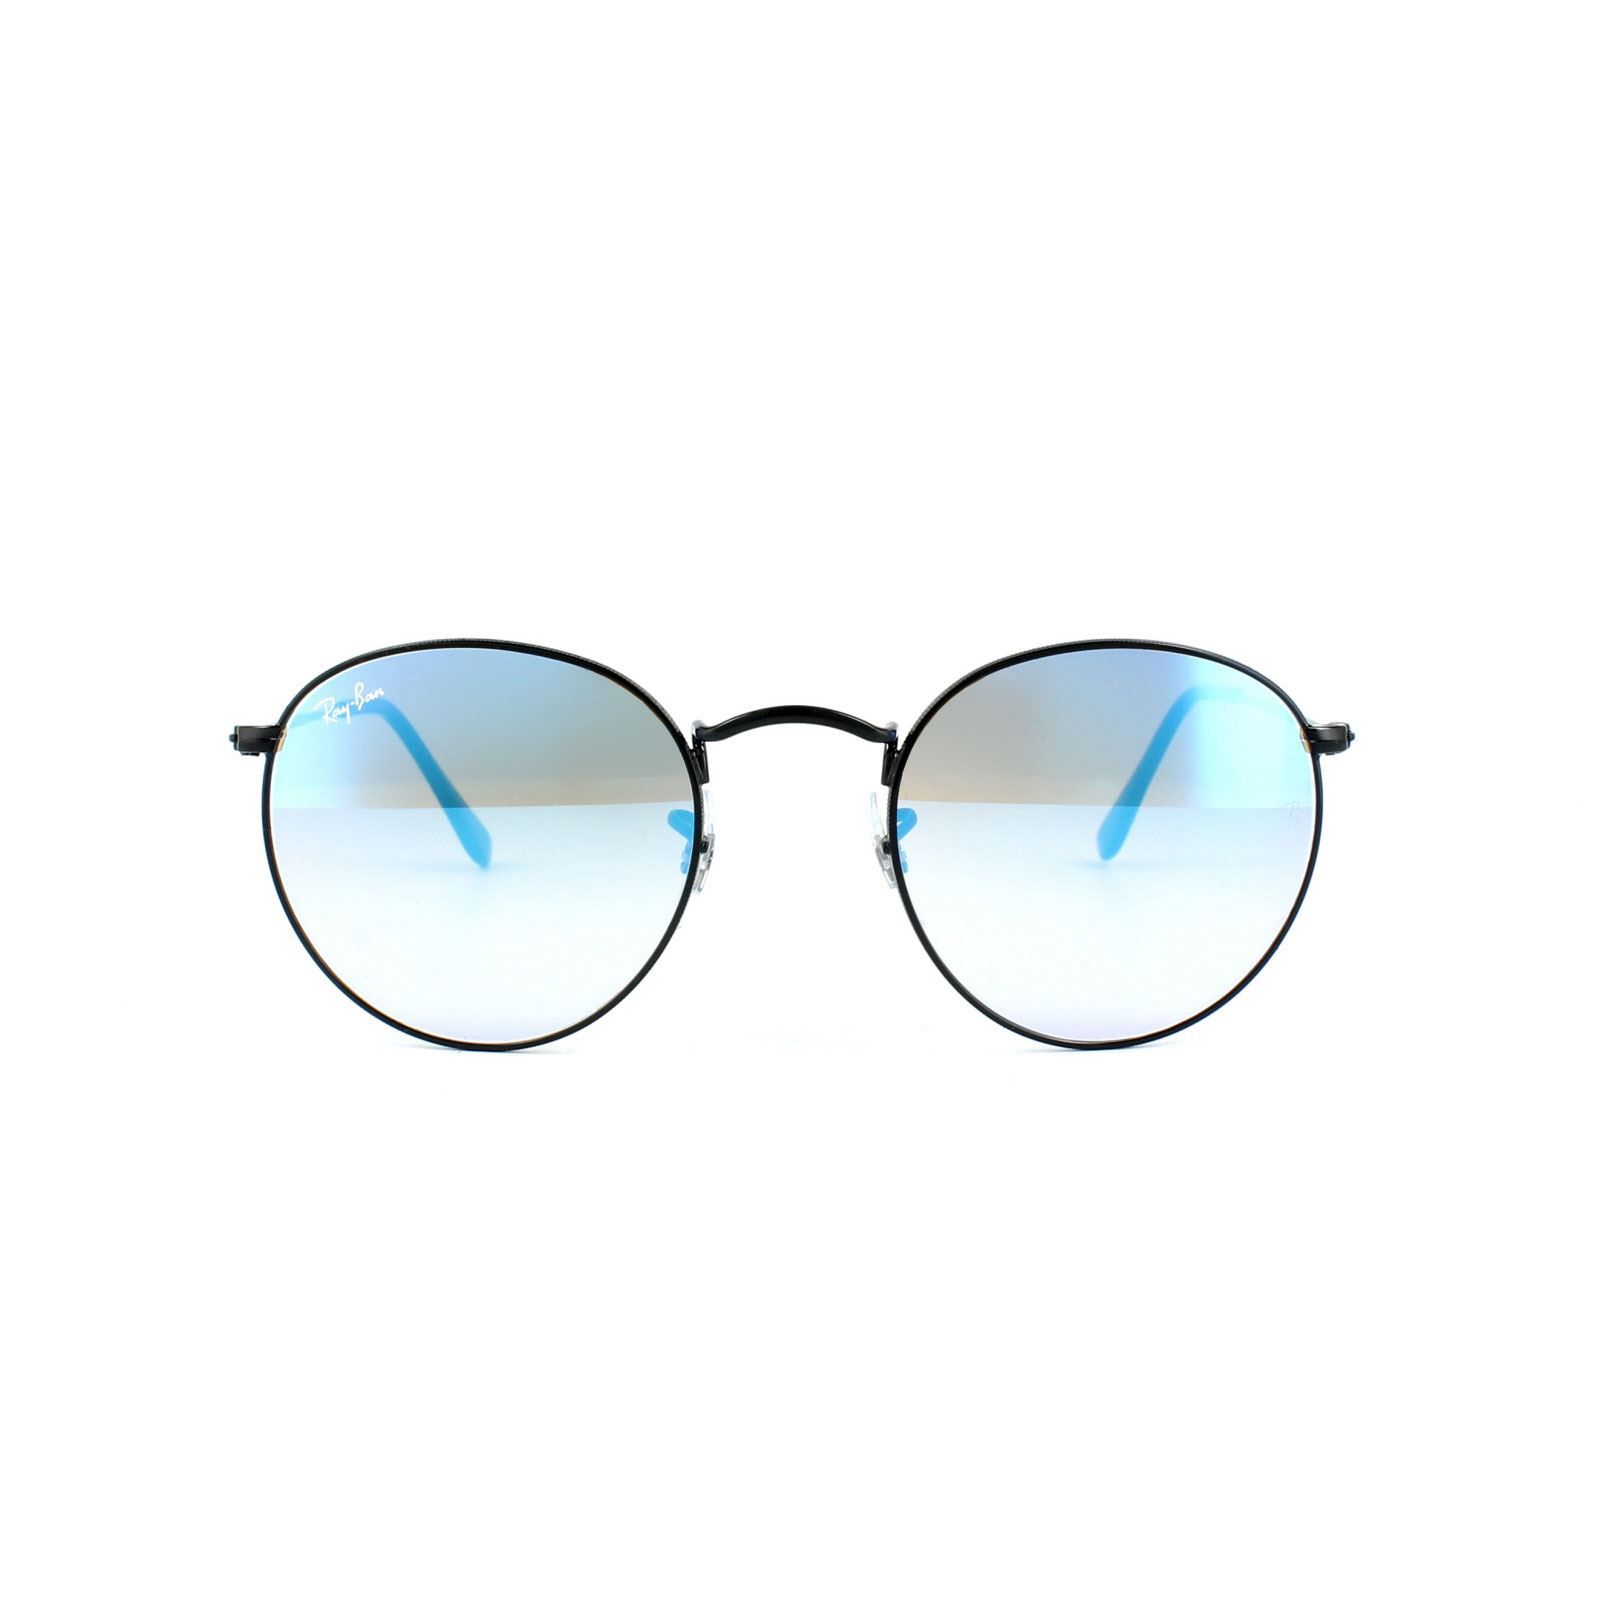 Ray-Ban Sunglasses 3447 002/4O Black Blue Gradient Mirror are rock and   roll edged shades taking their inspiration from John Lennon and many other   rock stars who have worn this shape since. Round and quirky makes for an   awesome sunglass that transcends any fashion trends.